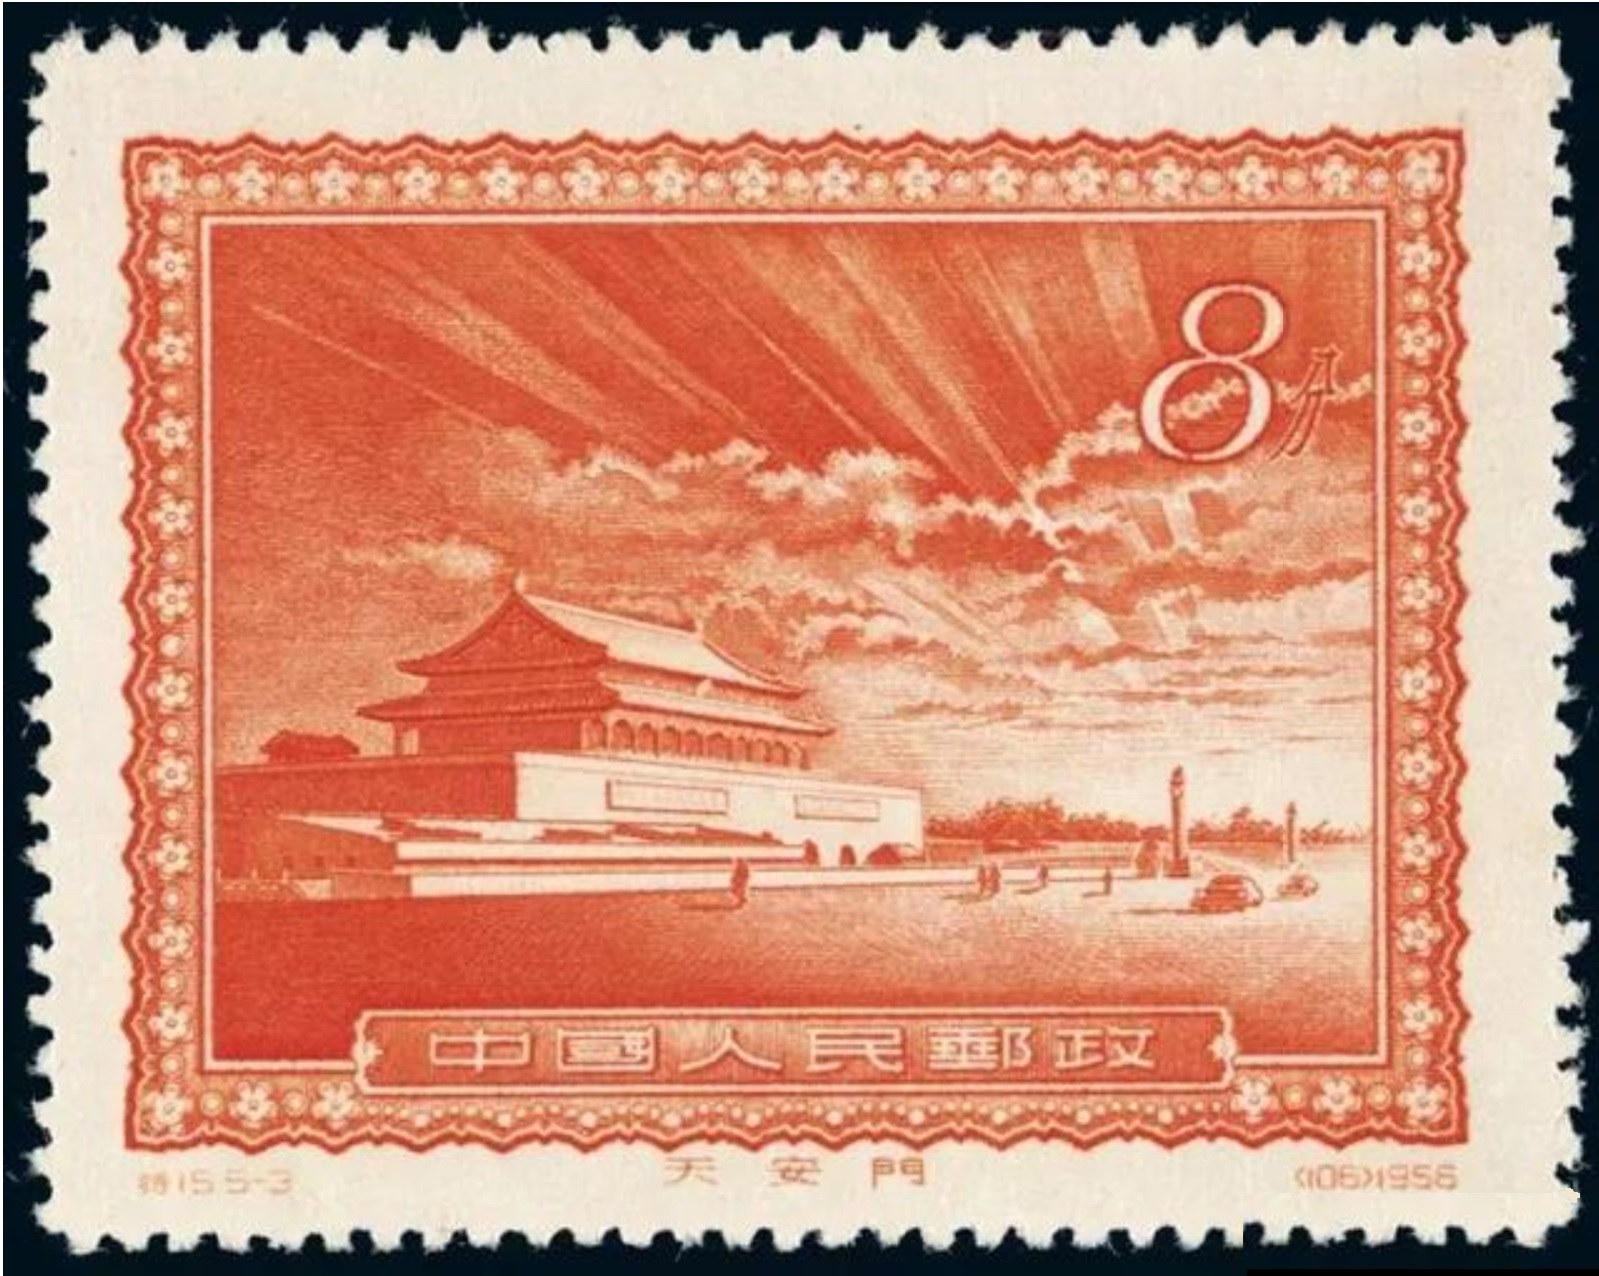 Chinese stamps: Tiananmen Square shines (special 15 5-3) 中国邮票 